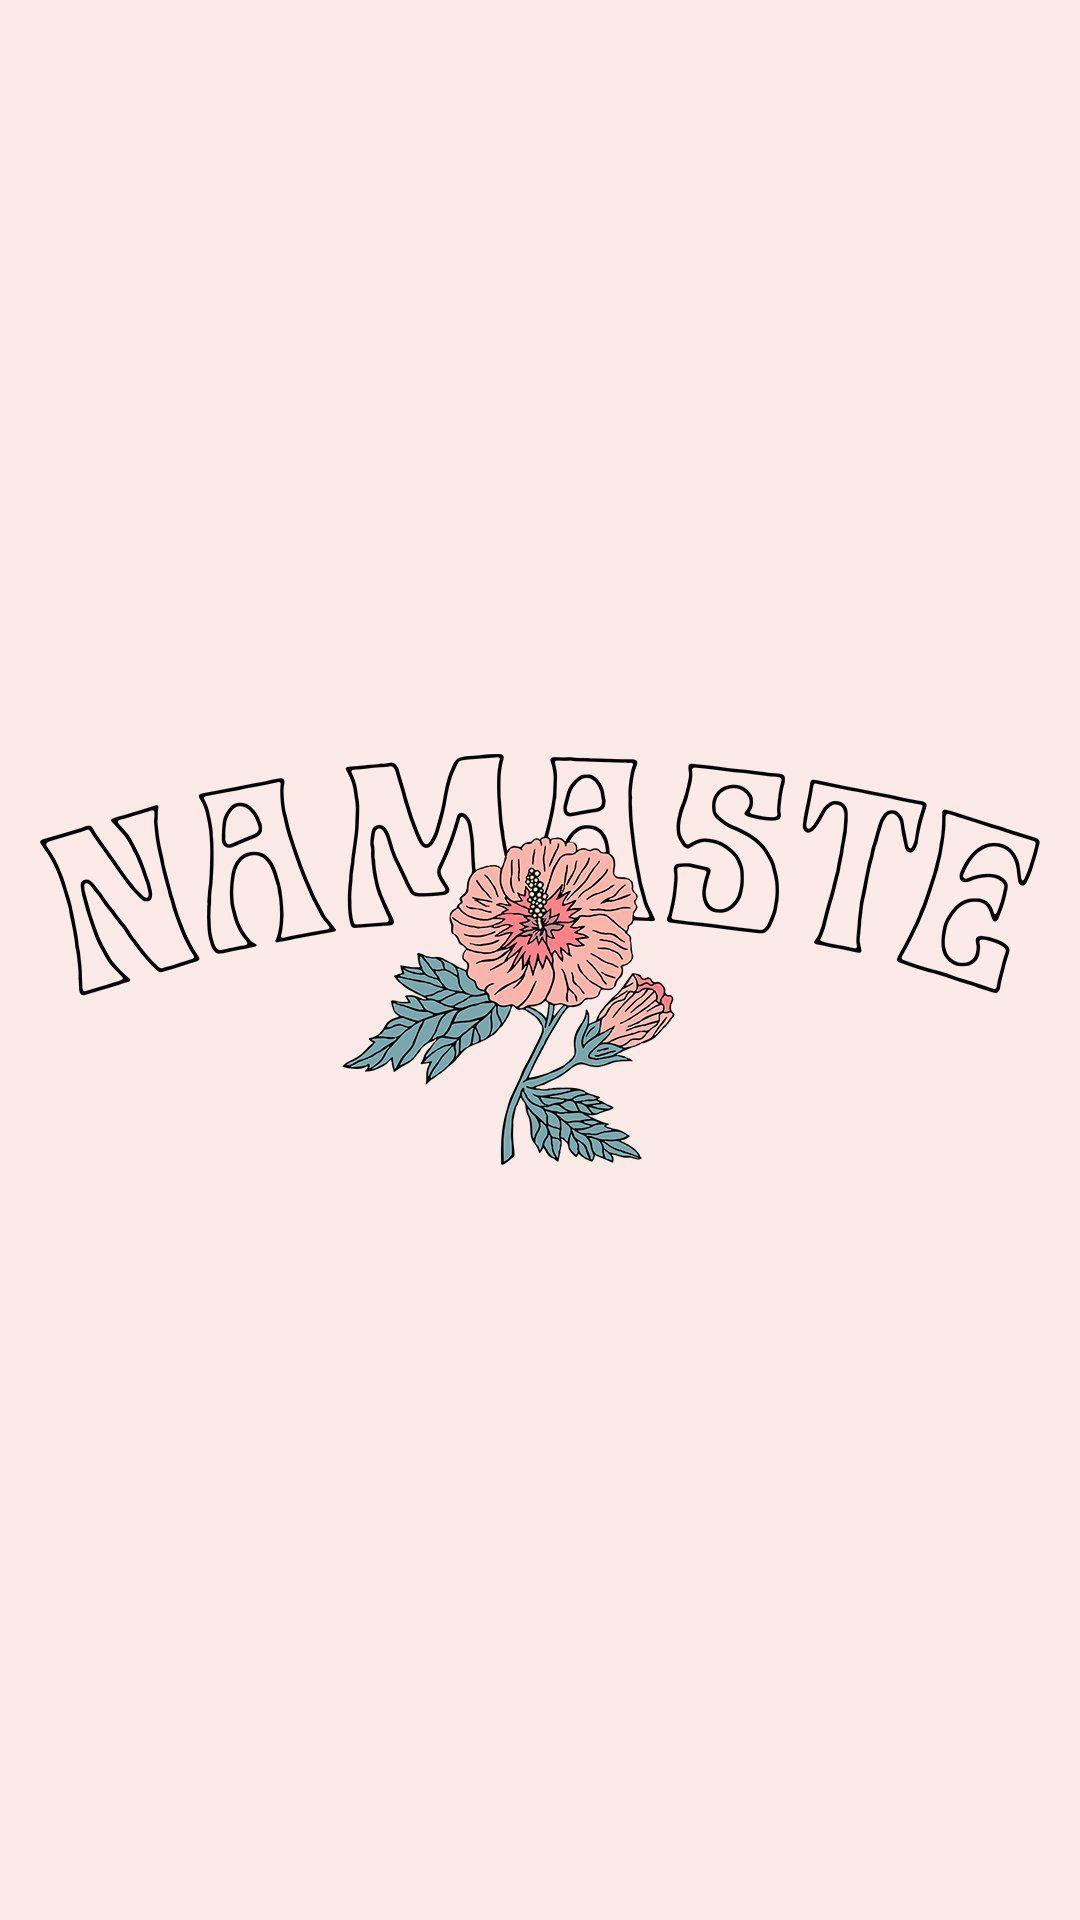 Instant Vibes: Download Our Weekly Wallpaper. namaste. iPhone